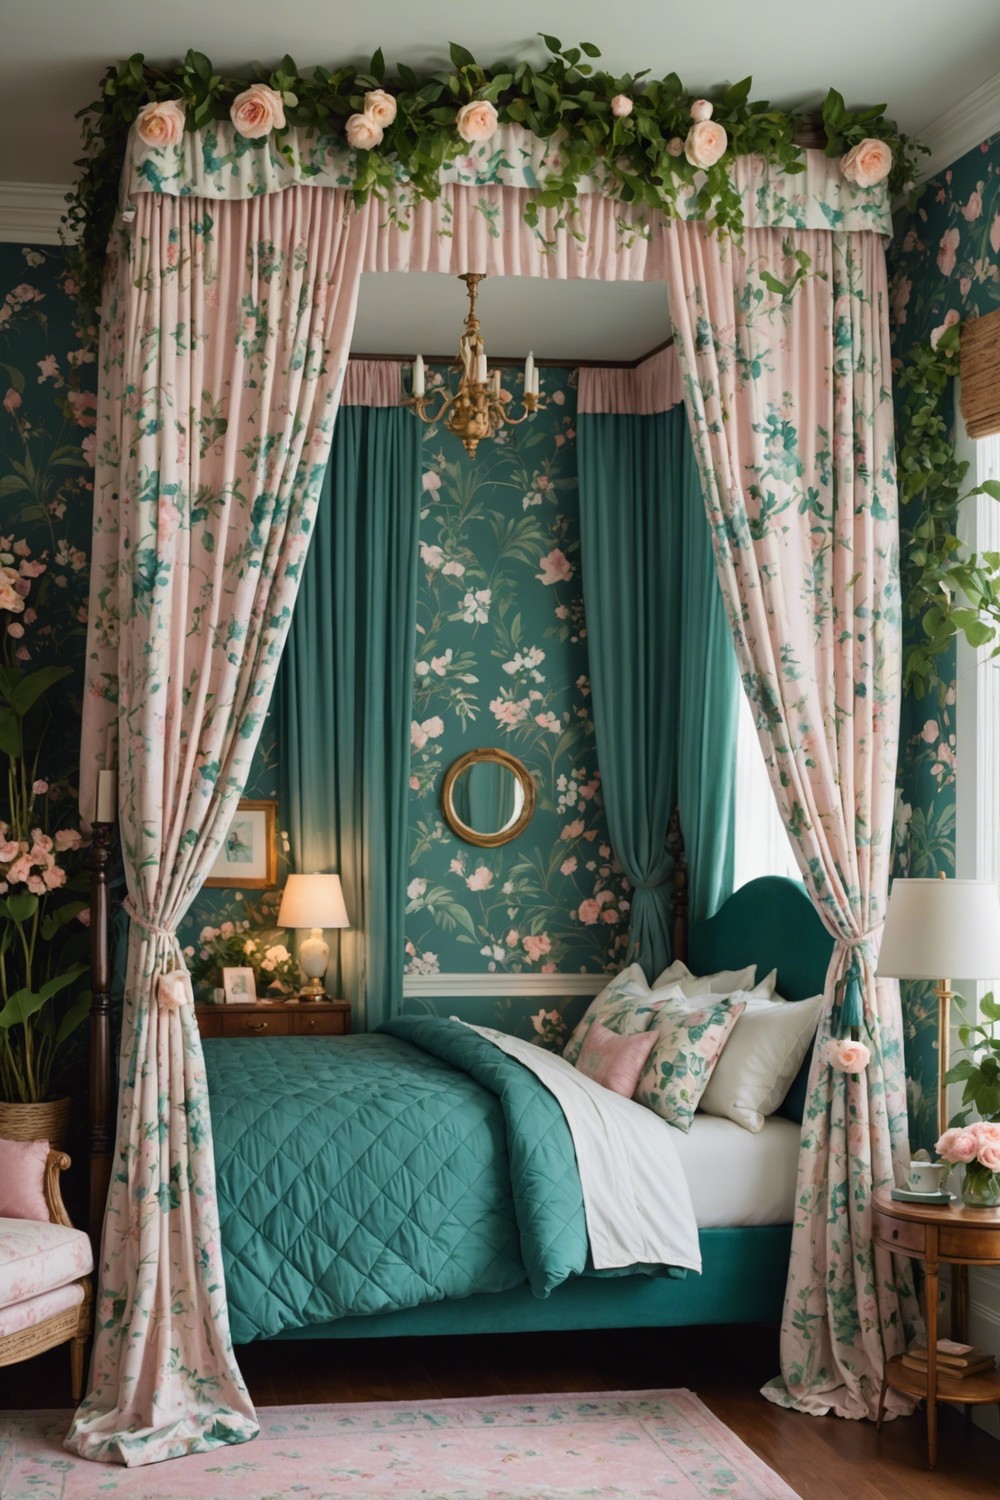 Whimsical Retreat: Teal and Floral Patterns